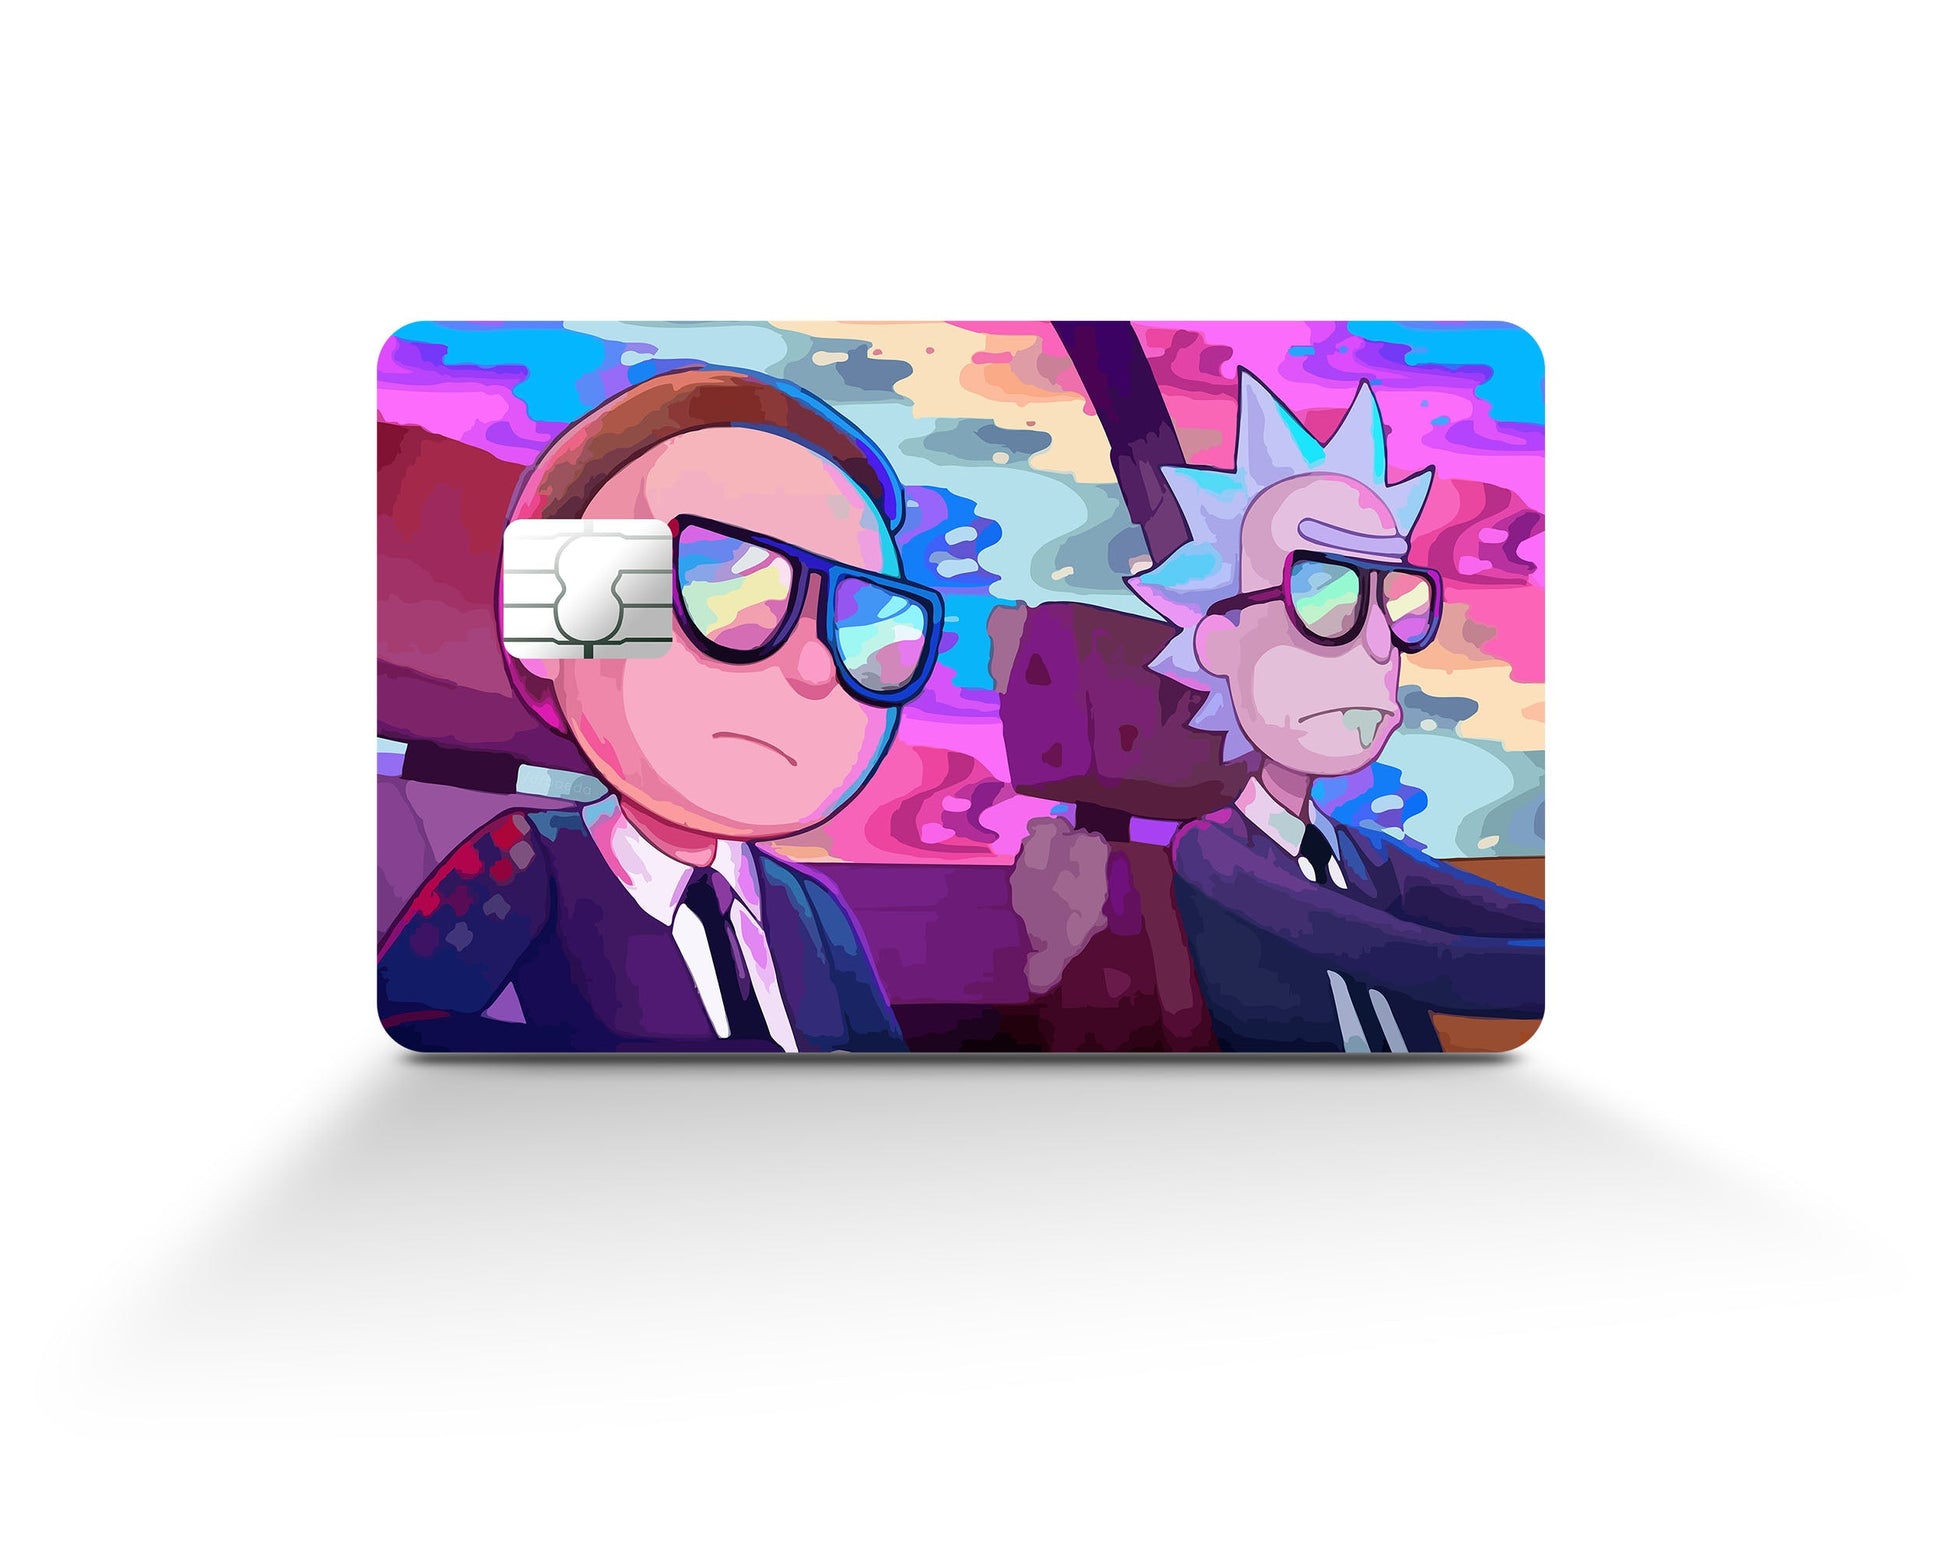 Anime Town Creations Credit Card Agents Rick and Morty Full Skins - Anime Rick and Morty Credit Card Skin